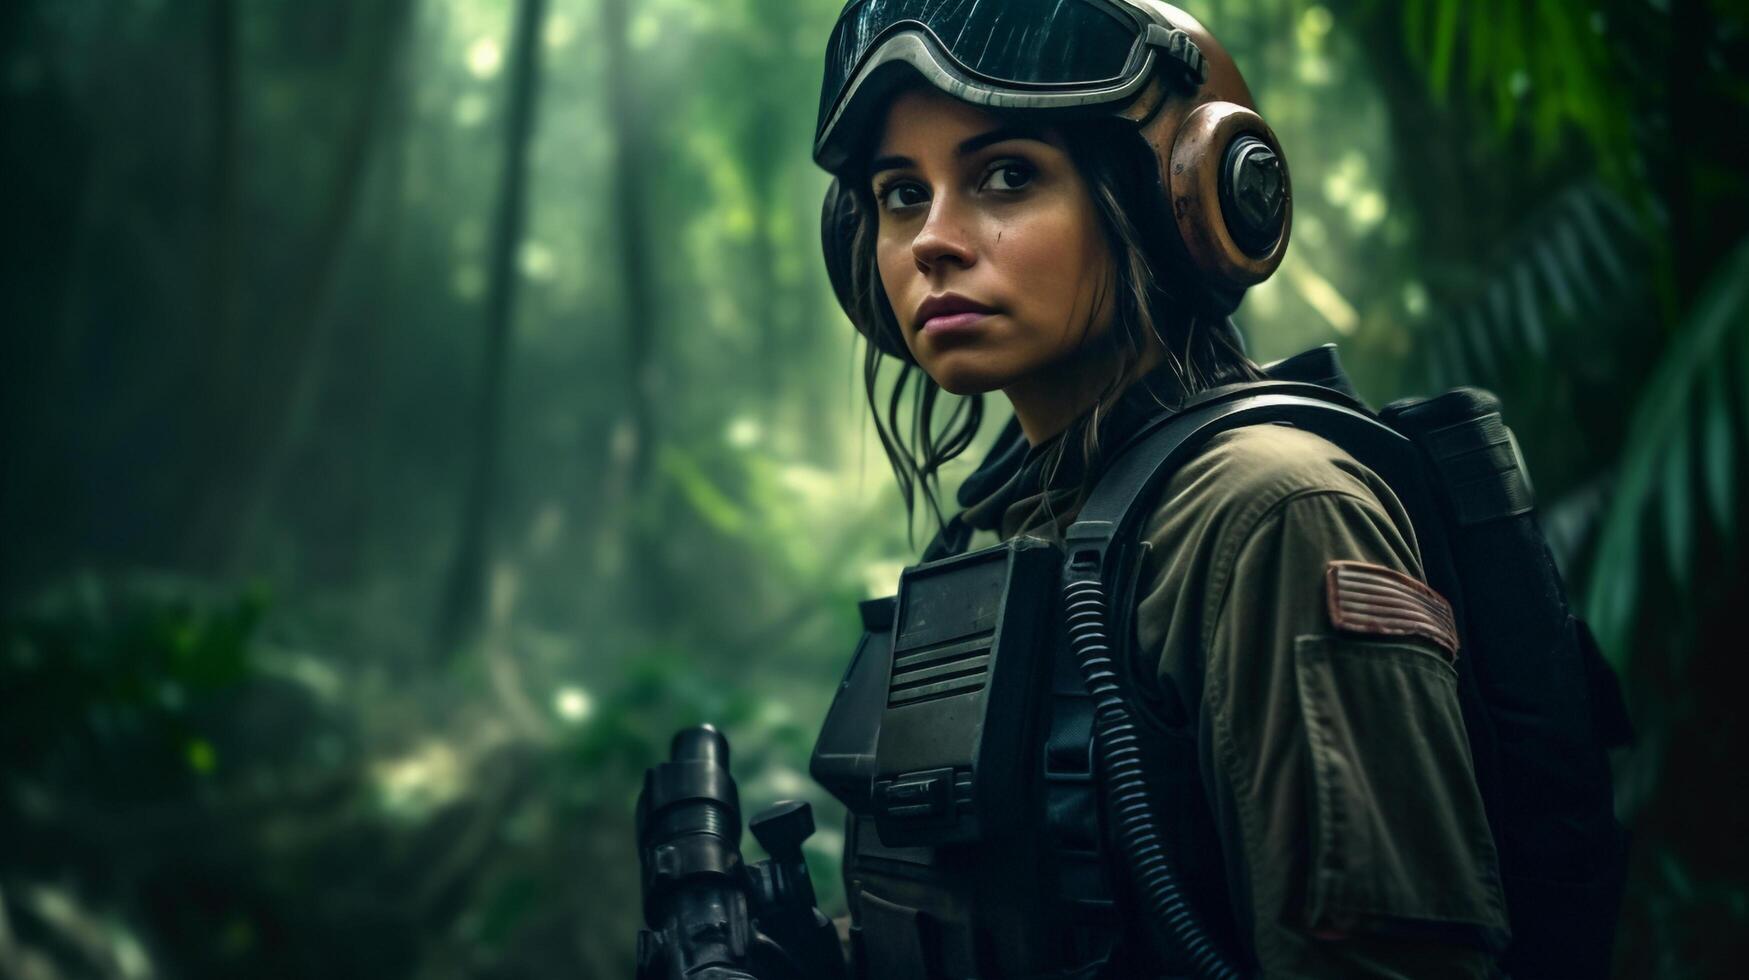 portrait of a military women if the forest created using photo